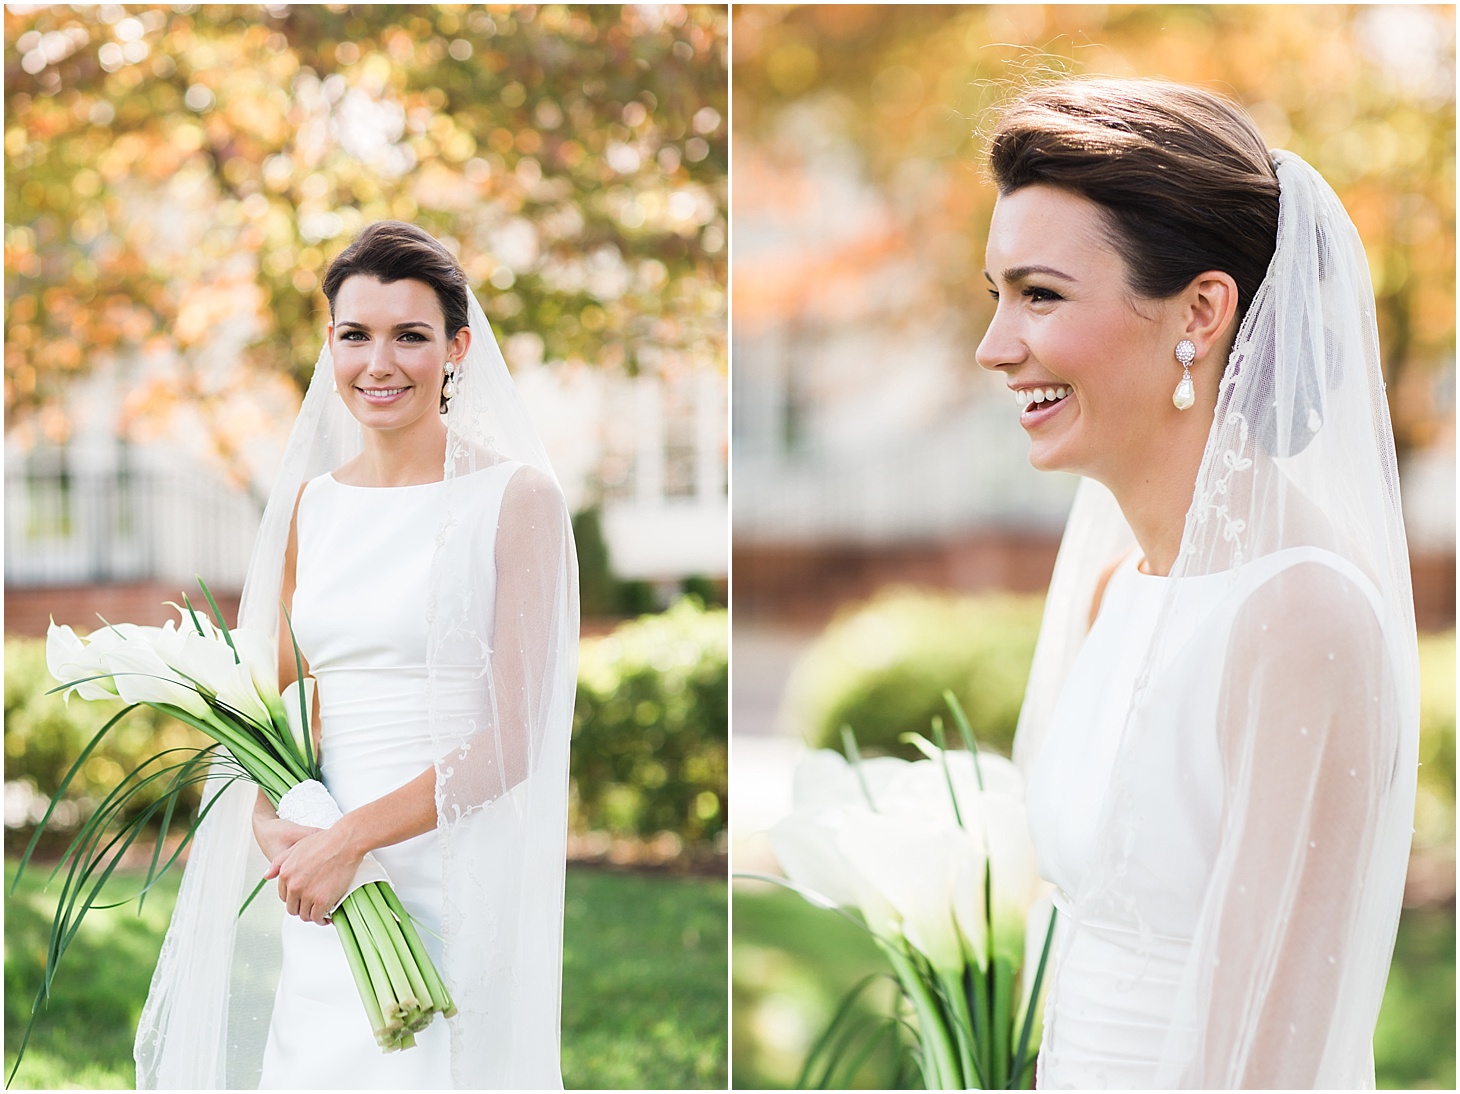 Bridal Portraits at Columbia Country Club | Wedding Ceremony at Cathedral of St. Matthew the Apostle | Classy October Wedding in Washington, D.C. | Sarah Bradshaw Photography